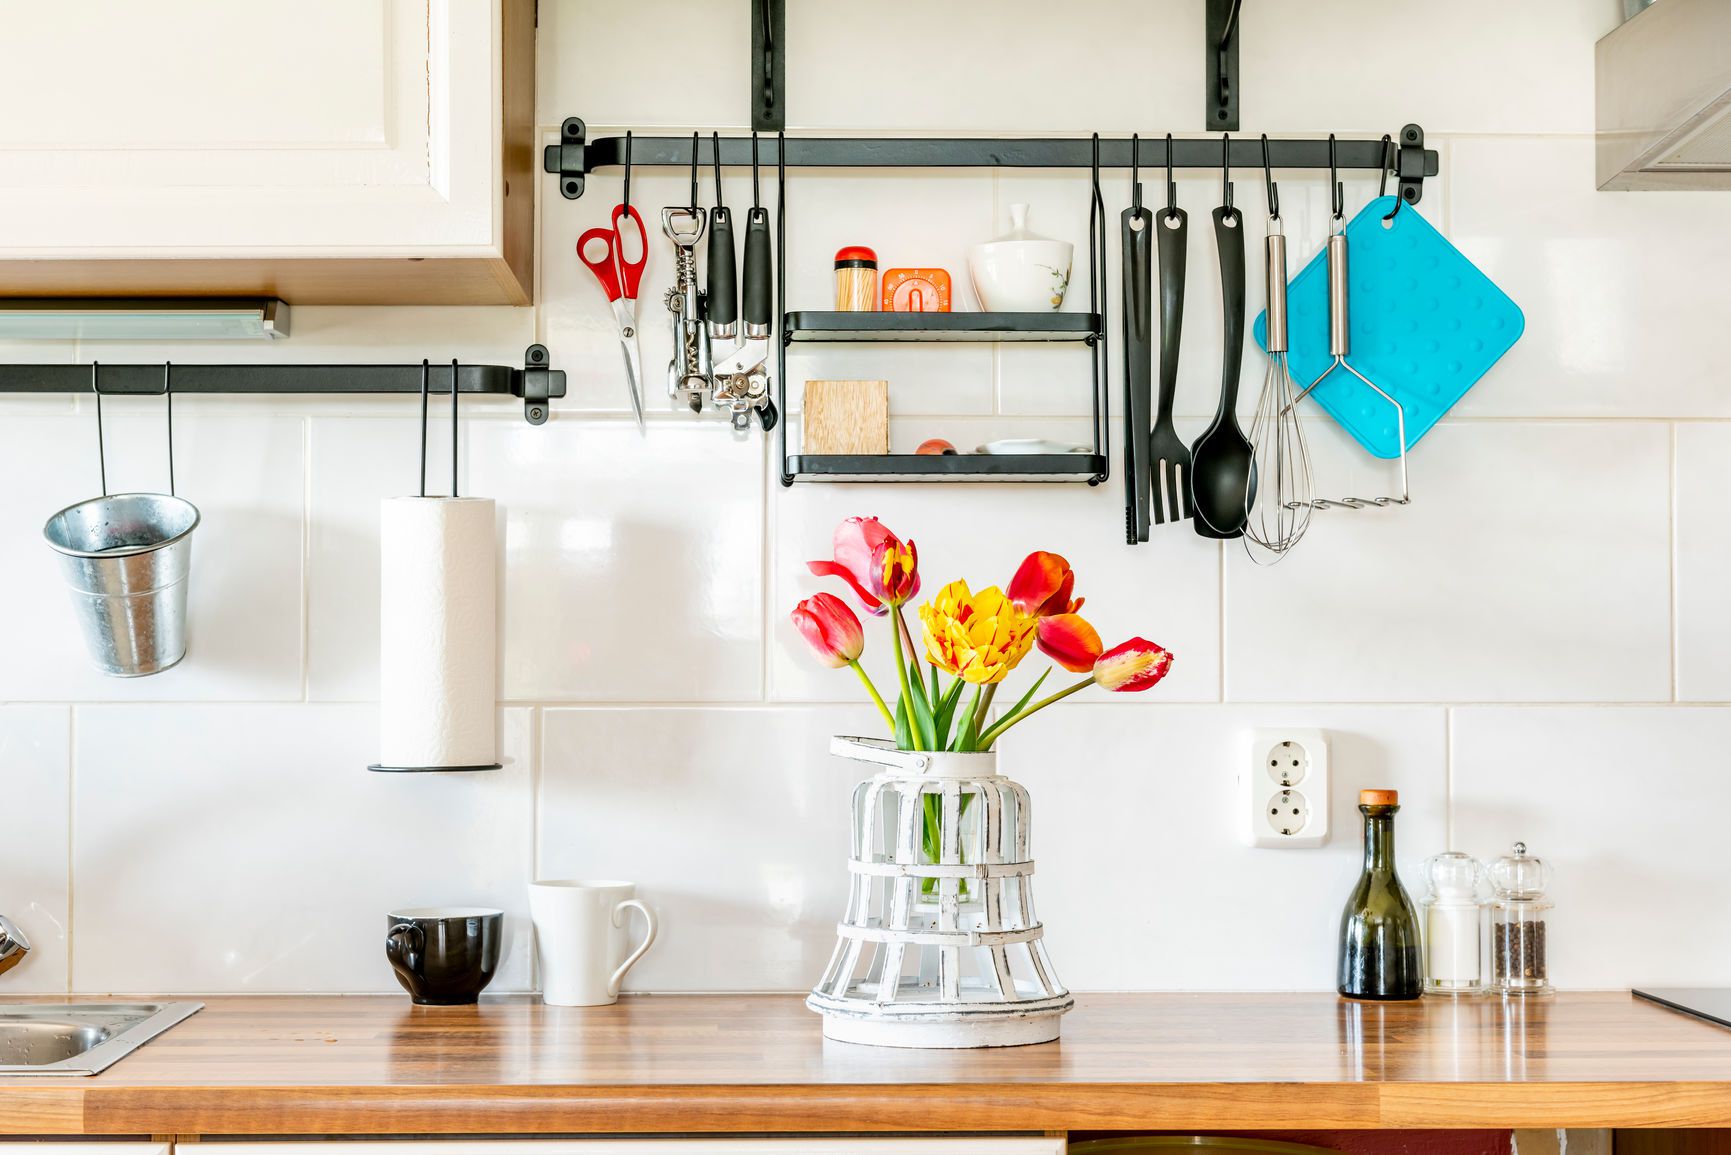 How To Organize A Kitchen When You Downsize: 11 Small Space Tips